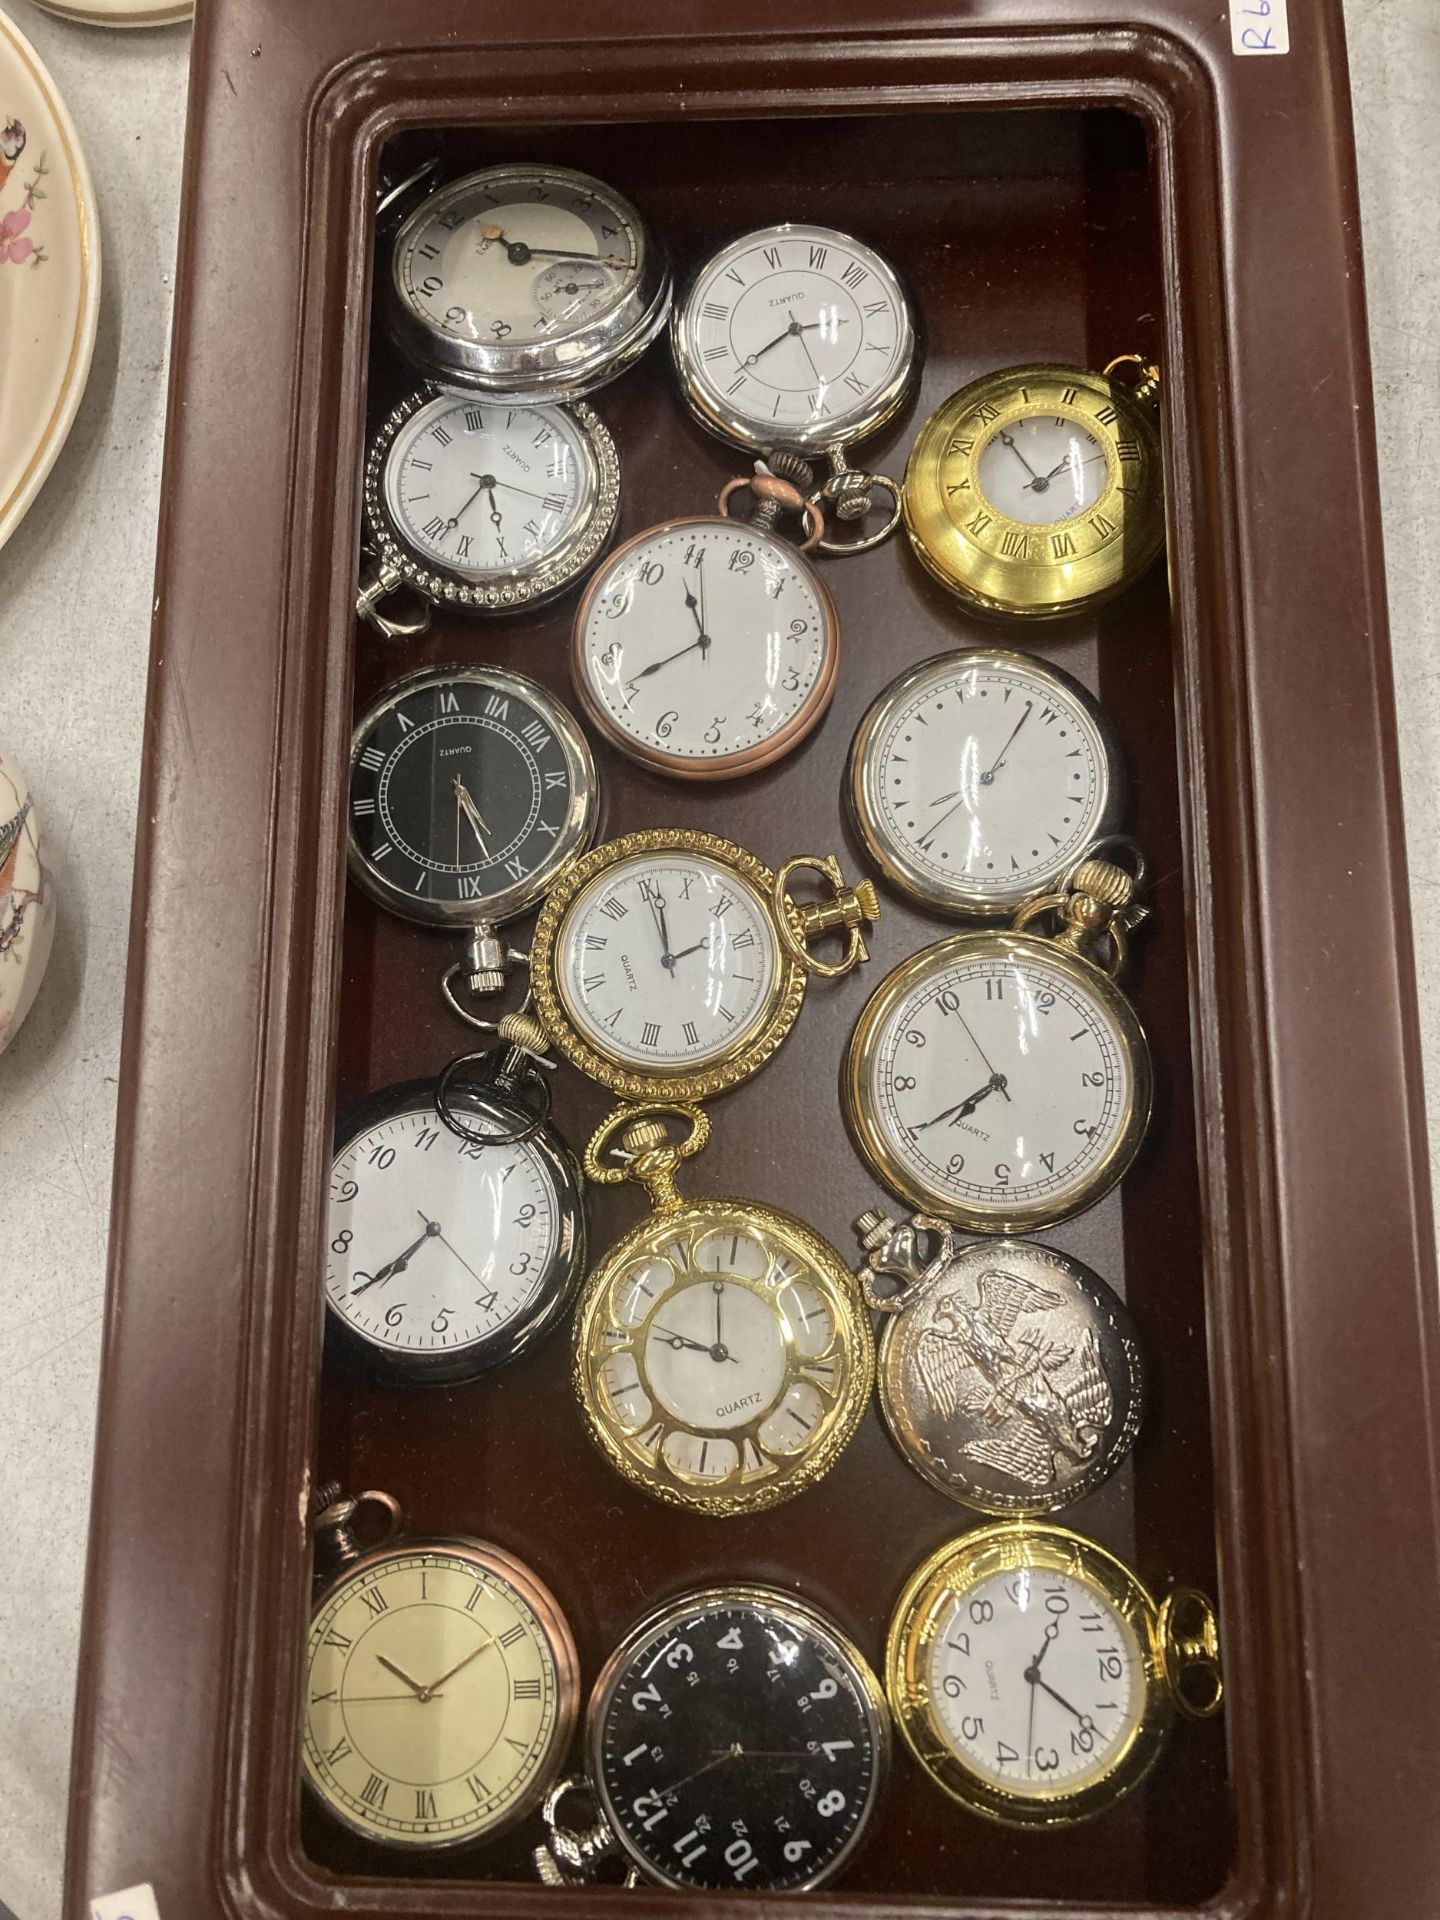 A QUANTITY OF VINTAGE STYLE POCKET WATCHES IN A WOODEN CASE - 15 IN TOTAL